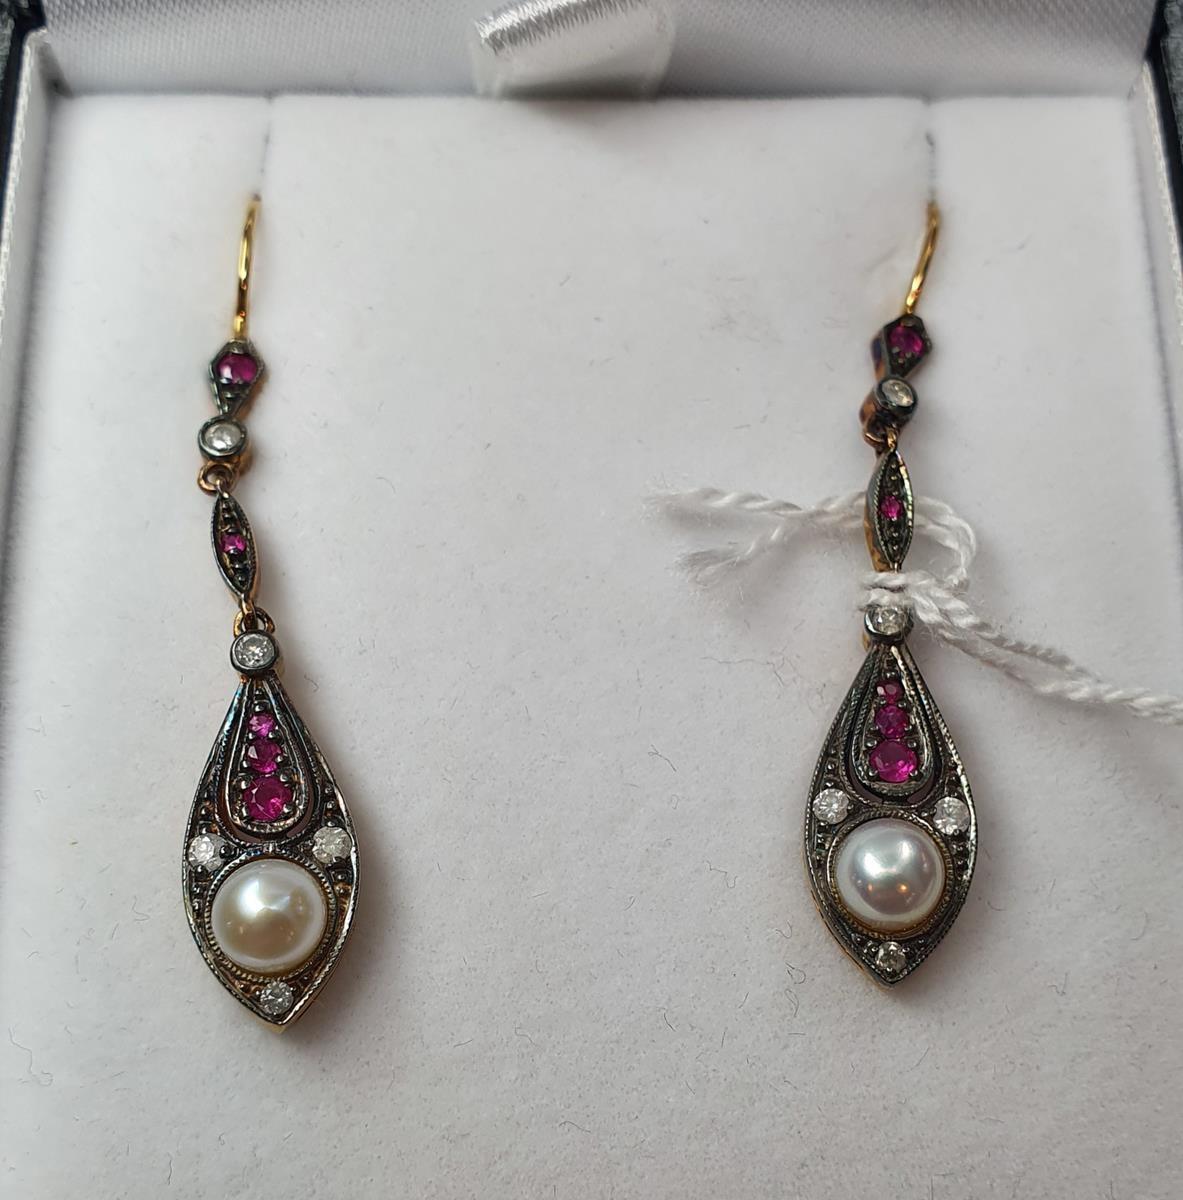 A pair of drop earrings set with rubies, diamonds and pearls - Image 3 of 4